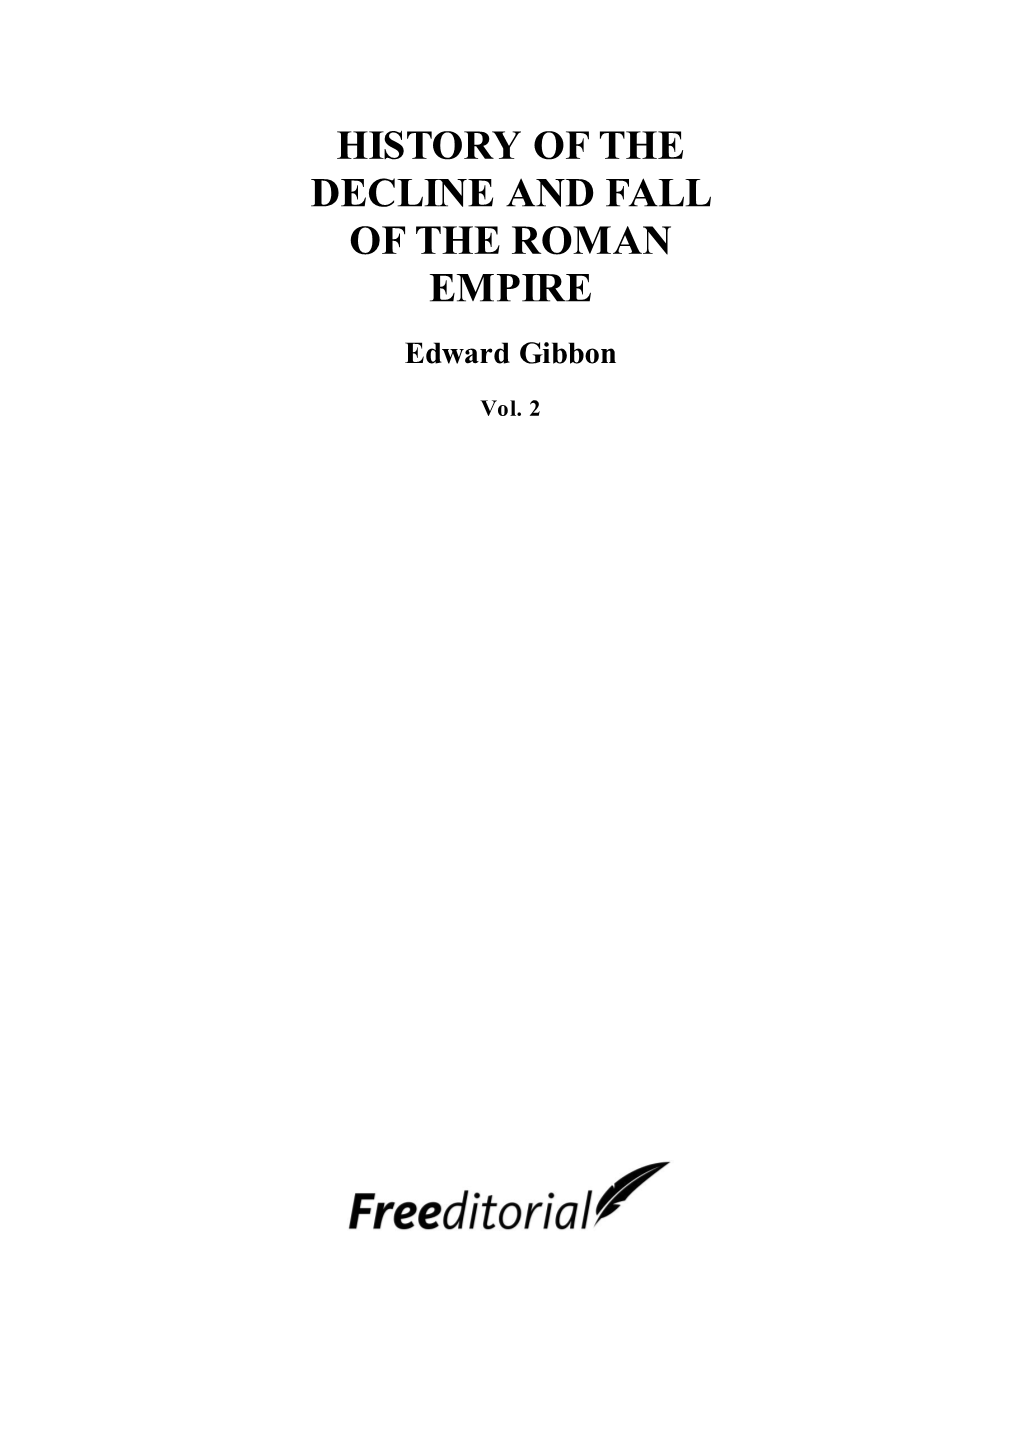 HISTORY of the DECLINE and FALL of the ROMAN EMPIRE Edward Gibbon